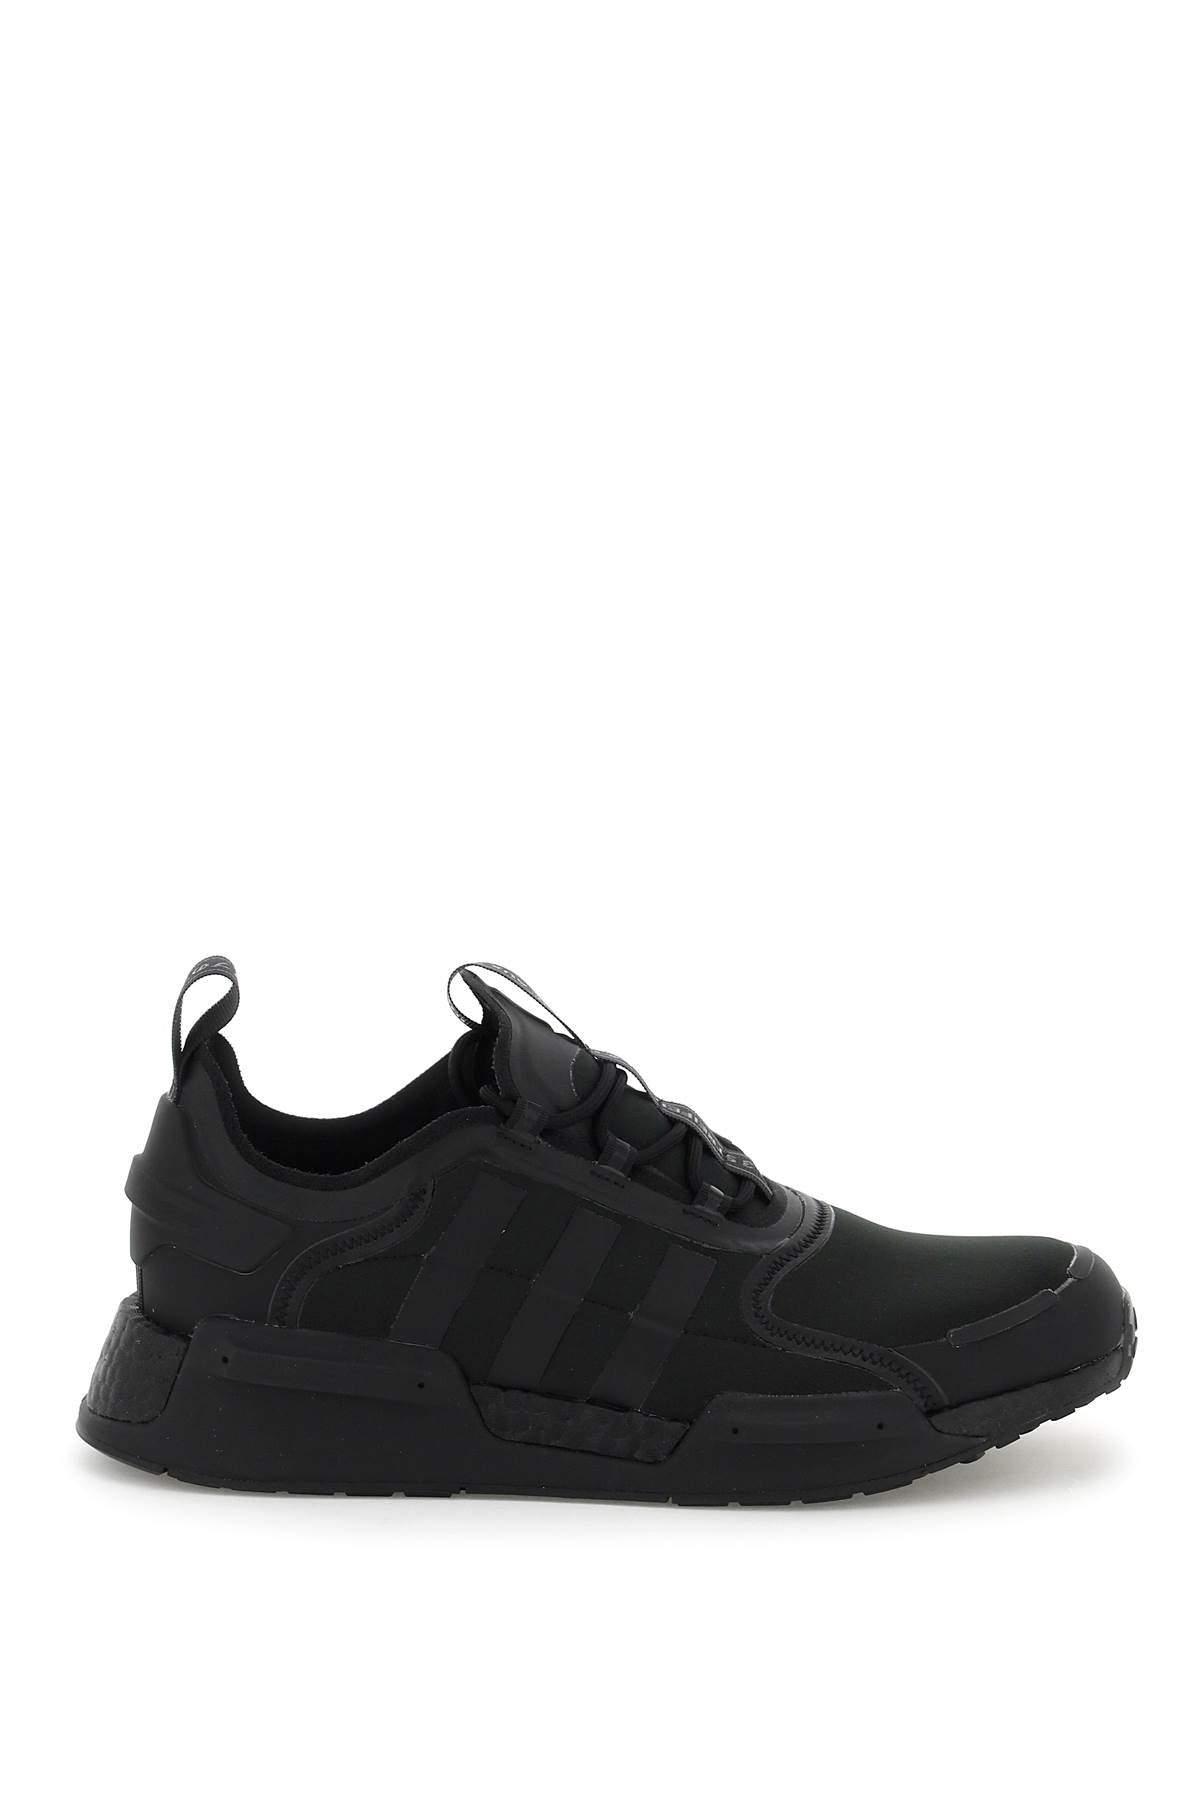 adidas Nmd V3 Sneakers in Black | Lyst